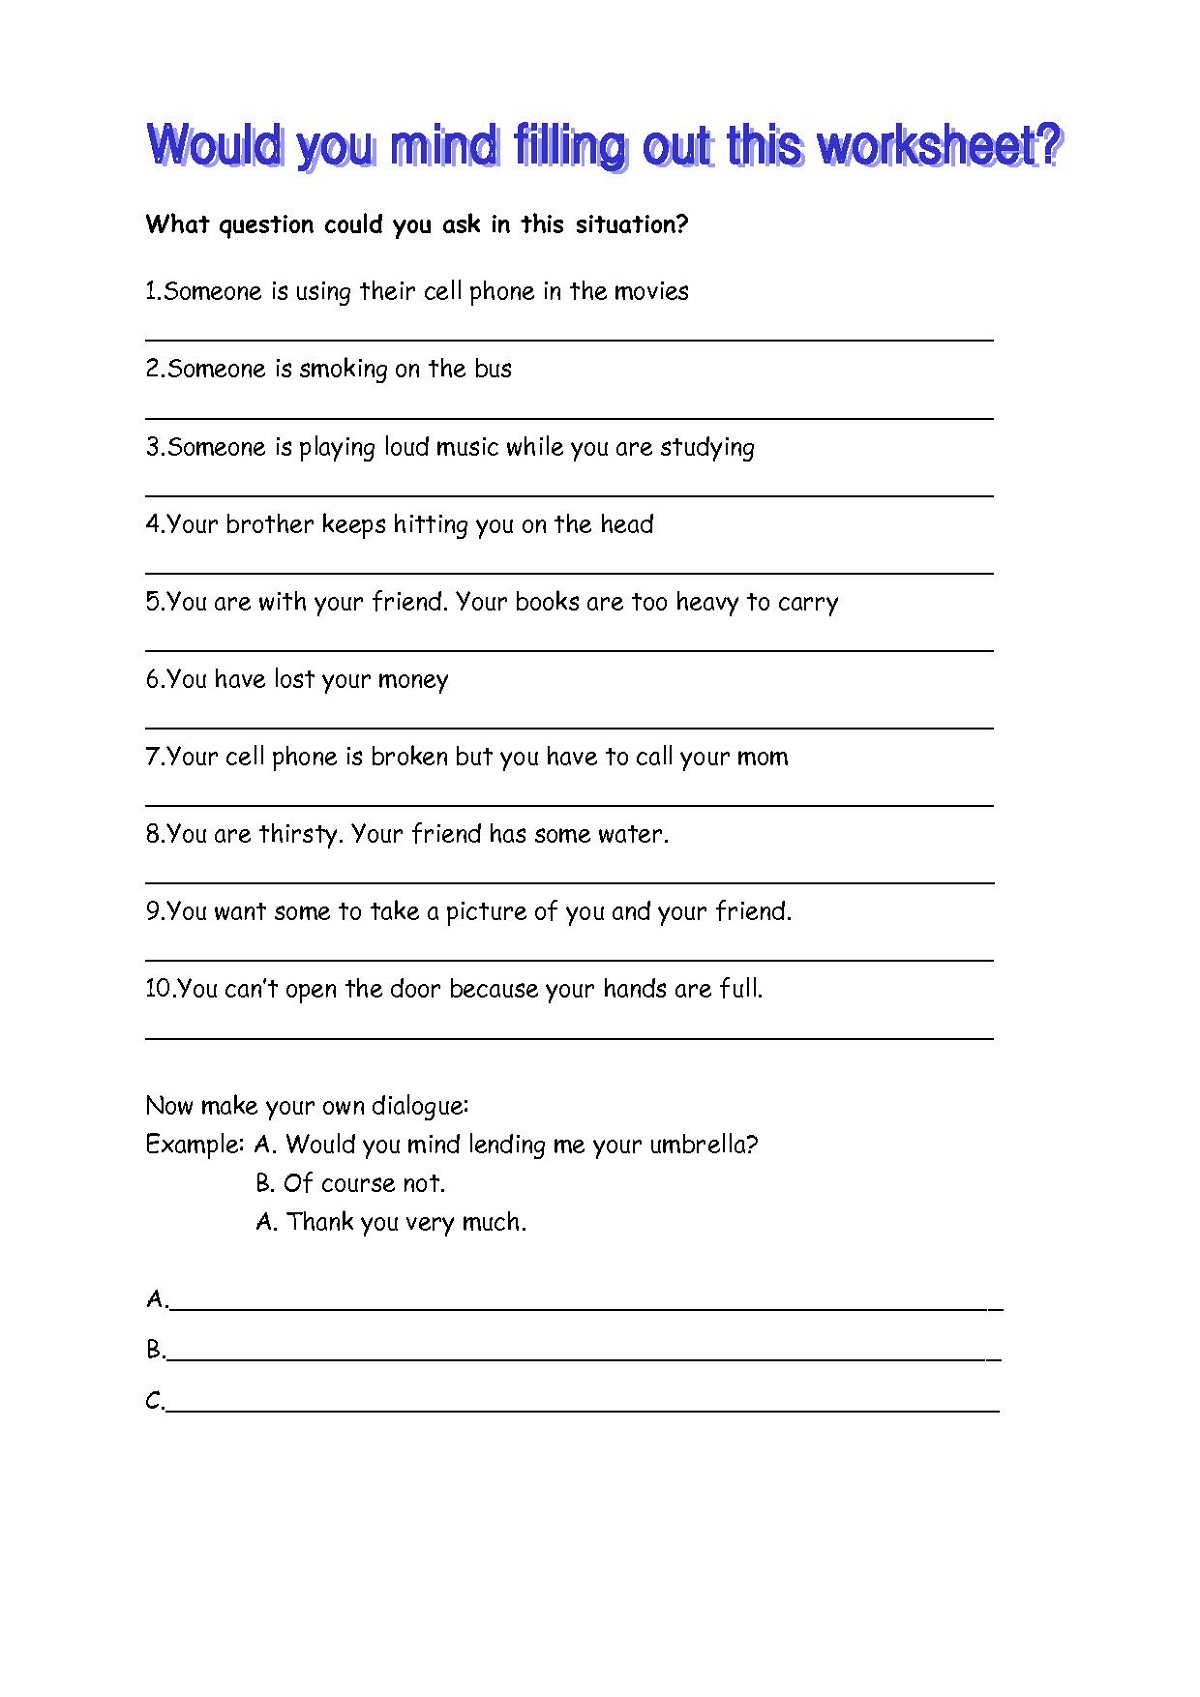 Worksheet Works for Adults